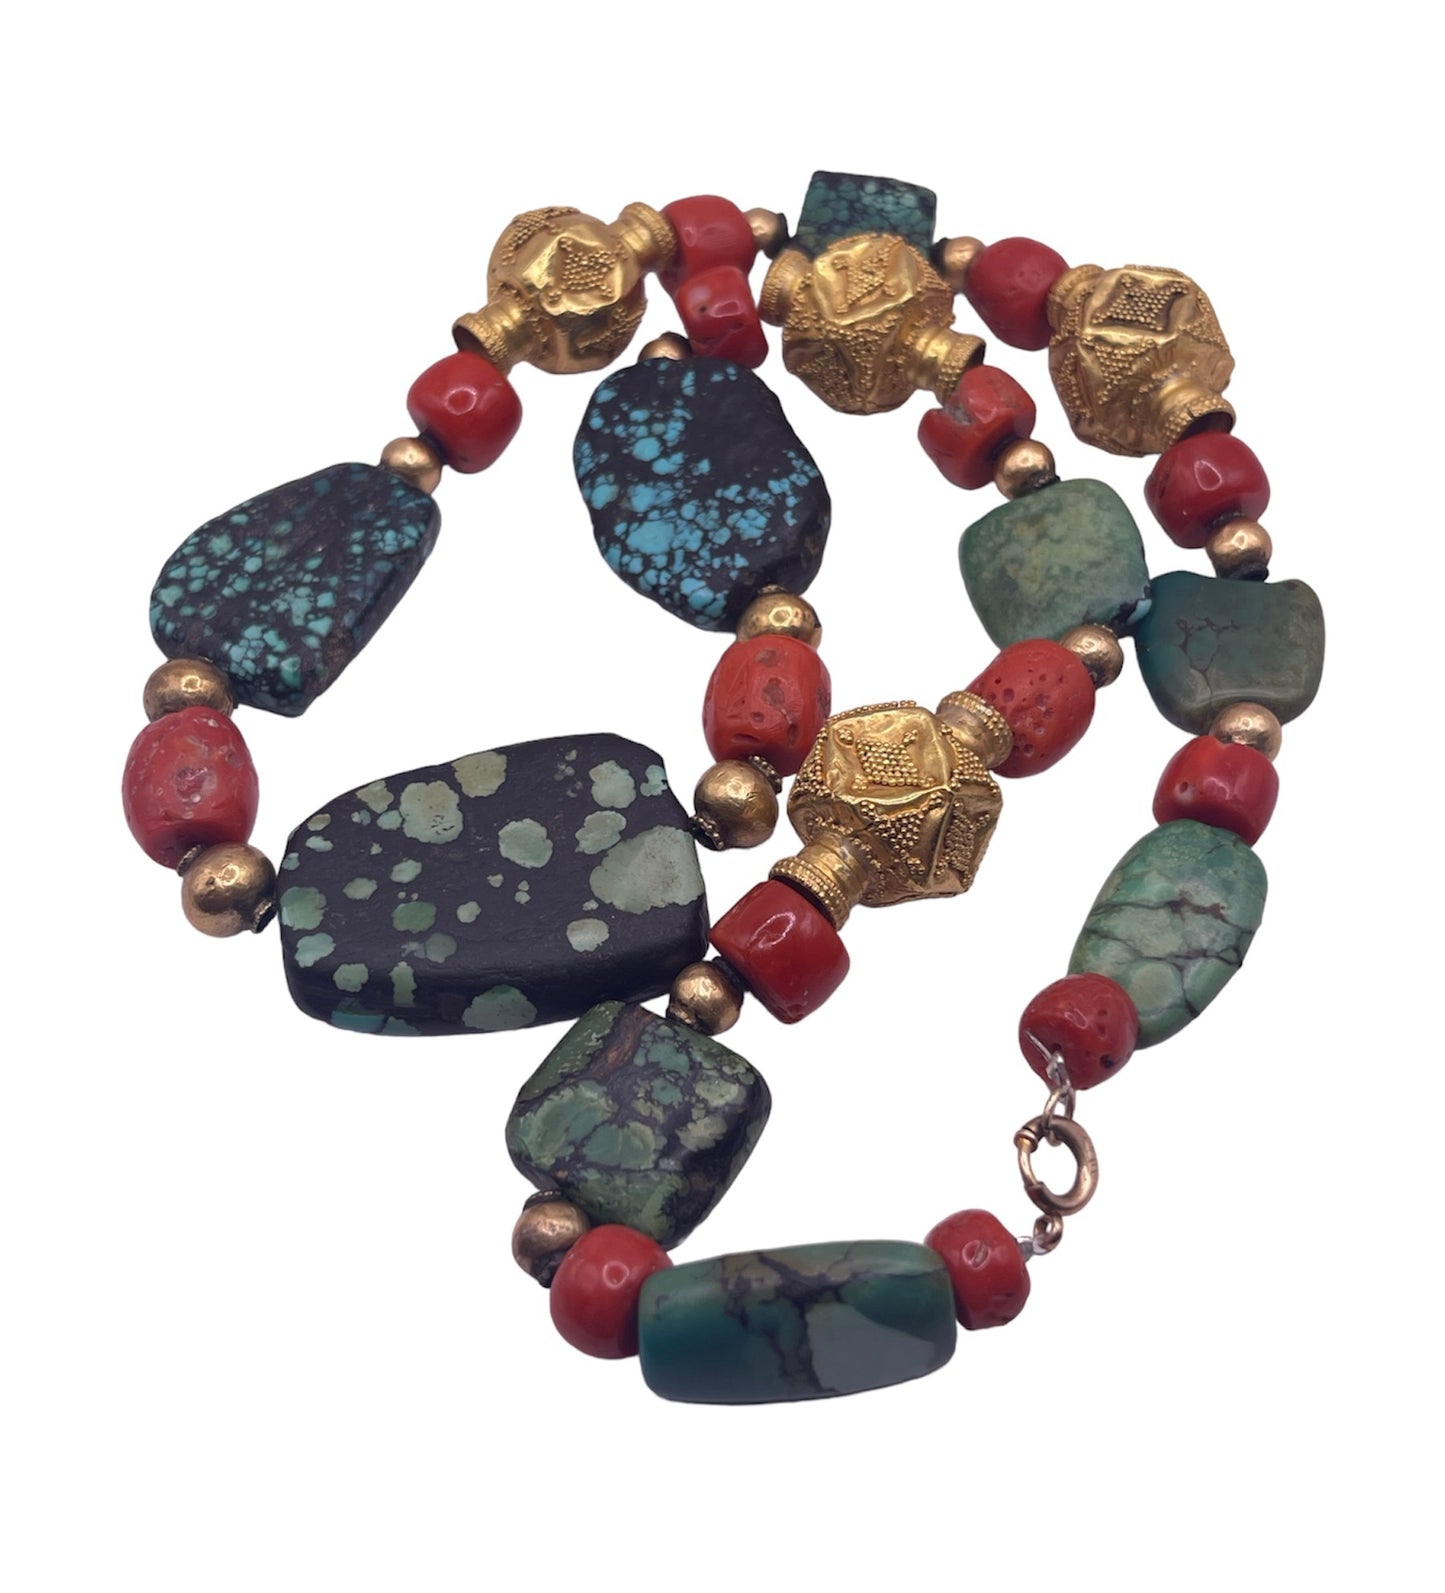 A necklace with antique Tibetan turquoise beads, coral beads and gold beads